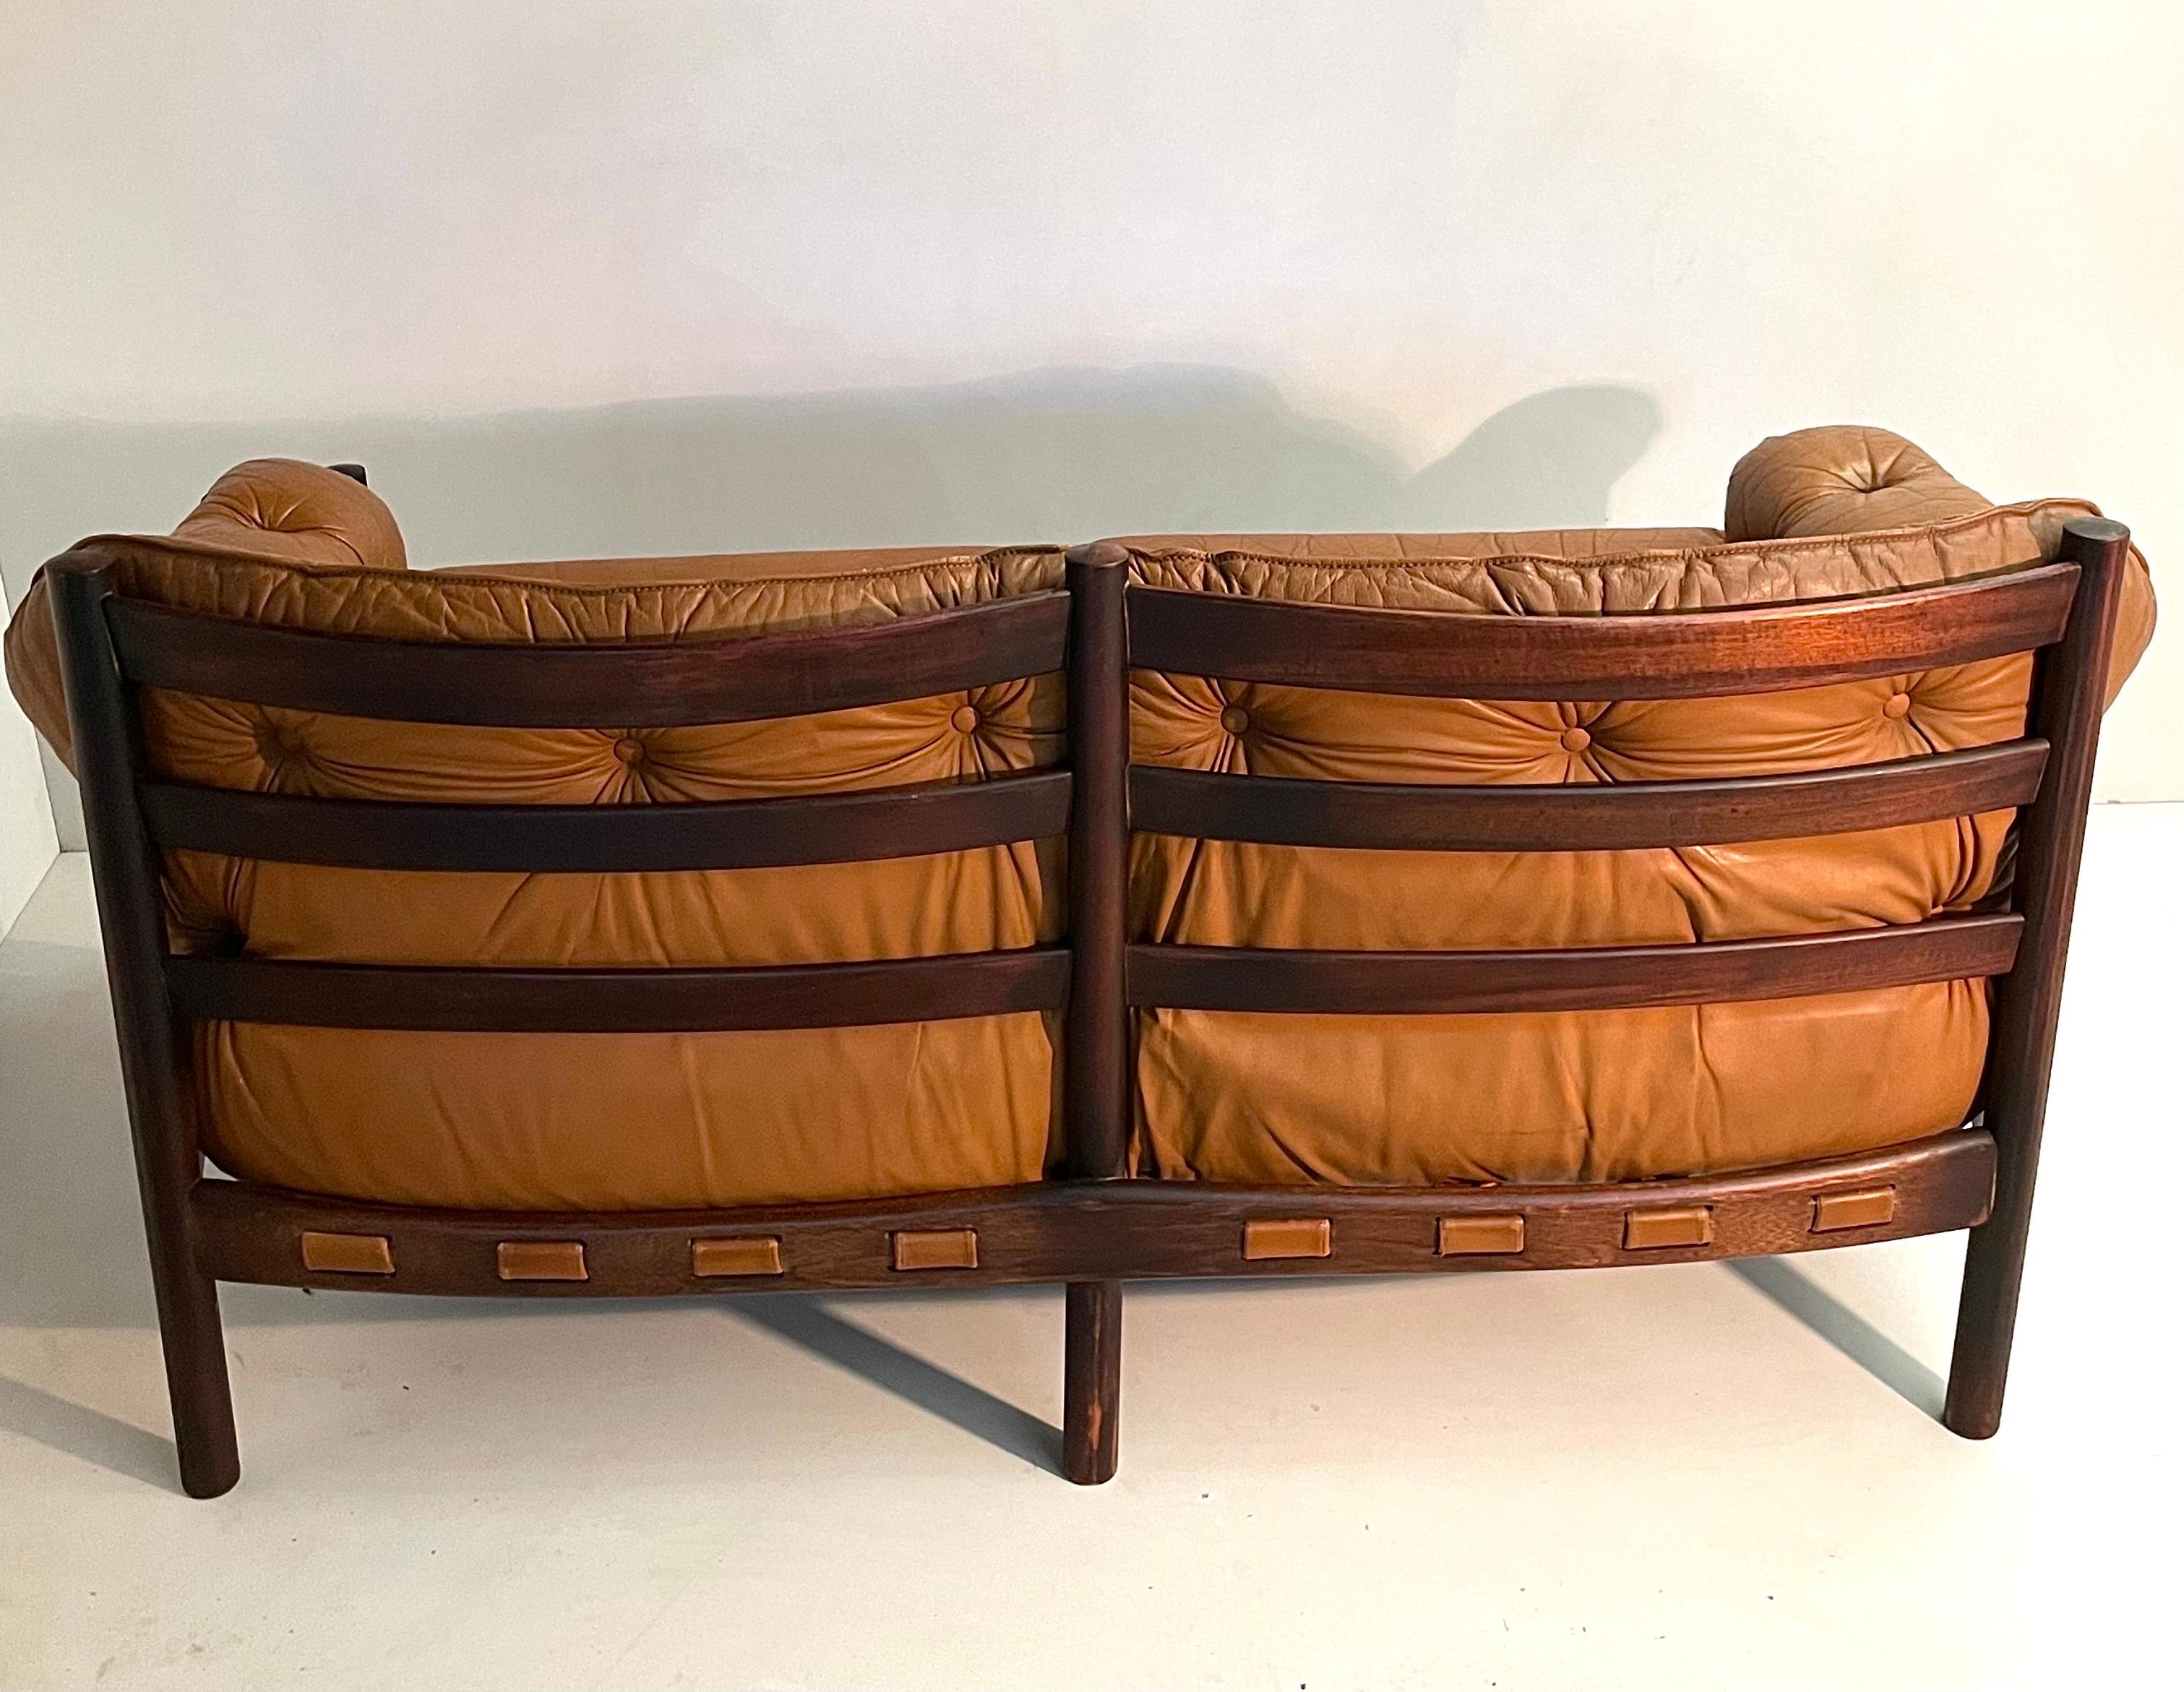 Mid-20th Century Sven Ellekaer for Coja Two-Seat Settee Sofa in soft Camel Leather For Sale